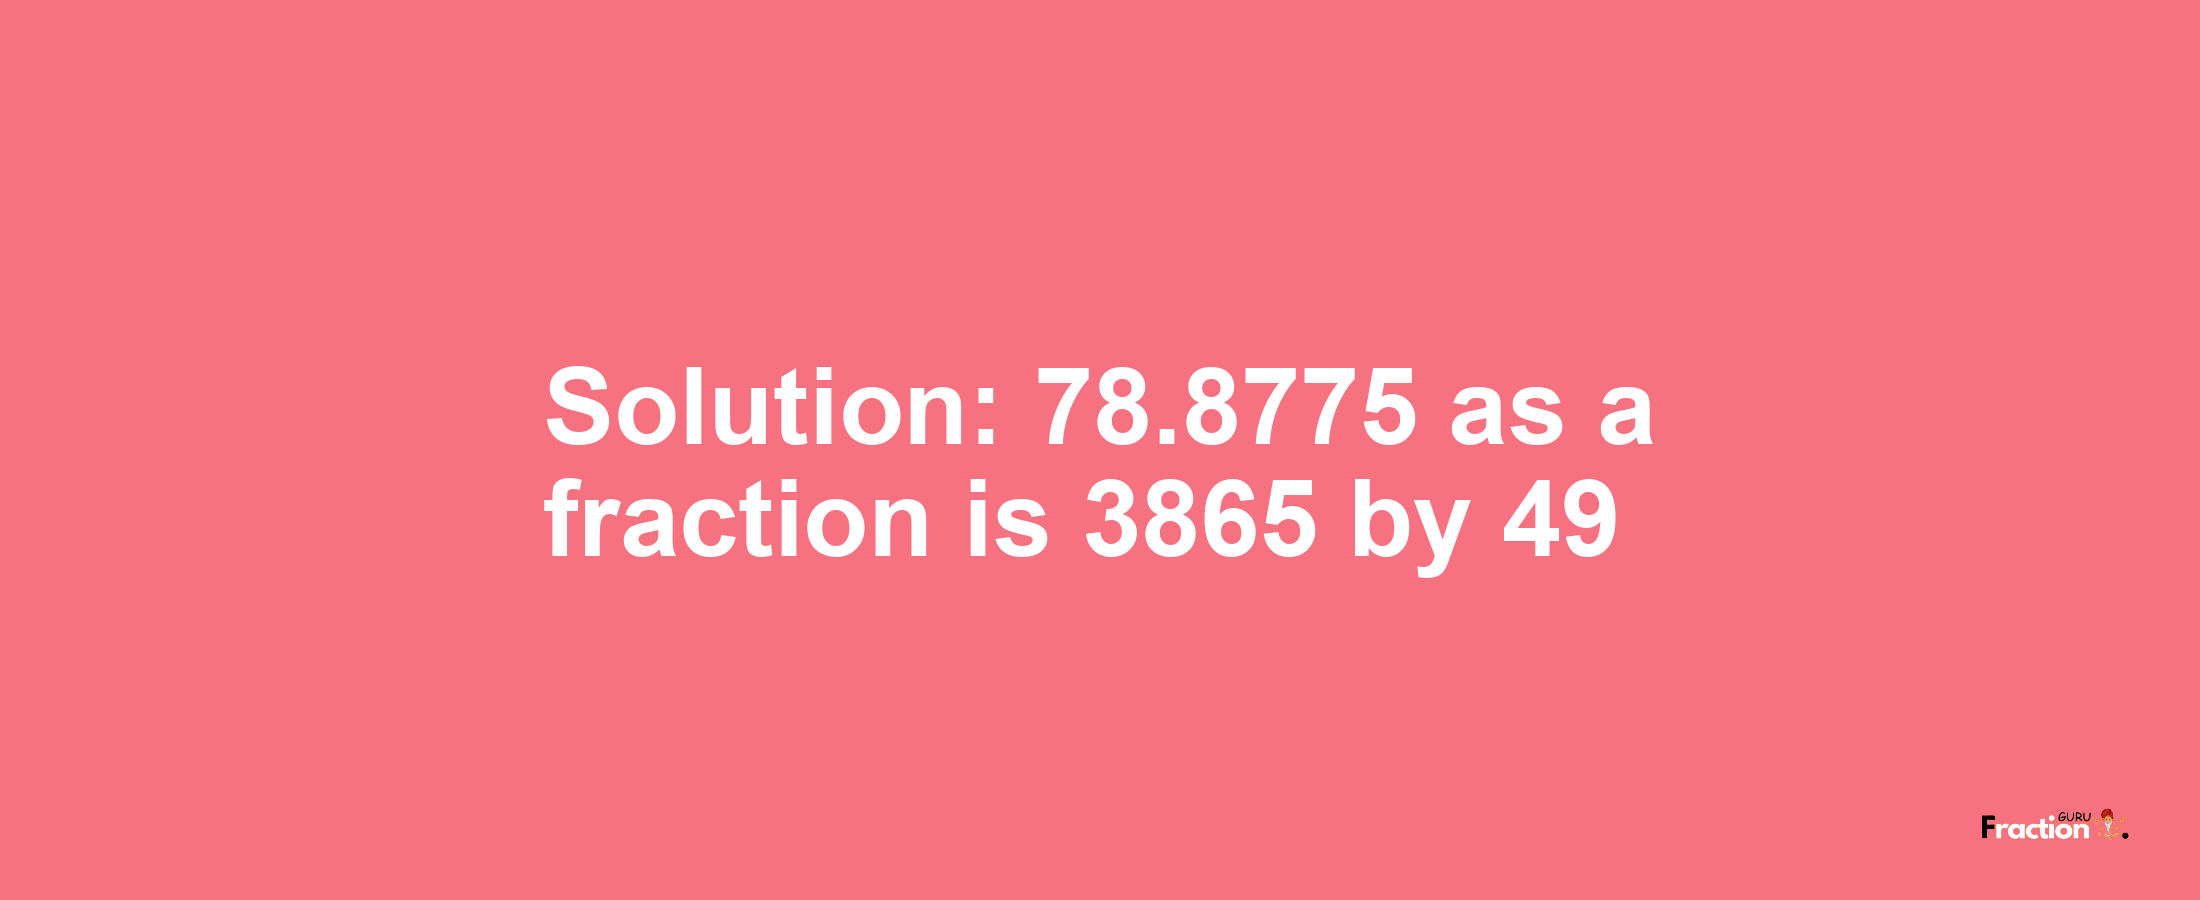 Solution:78.8775 as a fraction is 3865/49